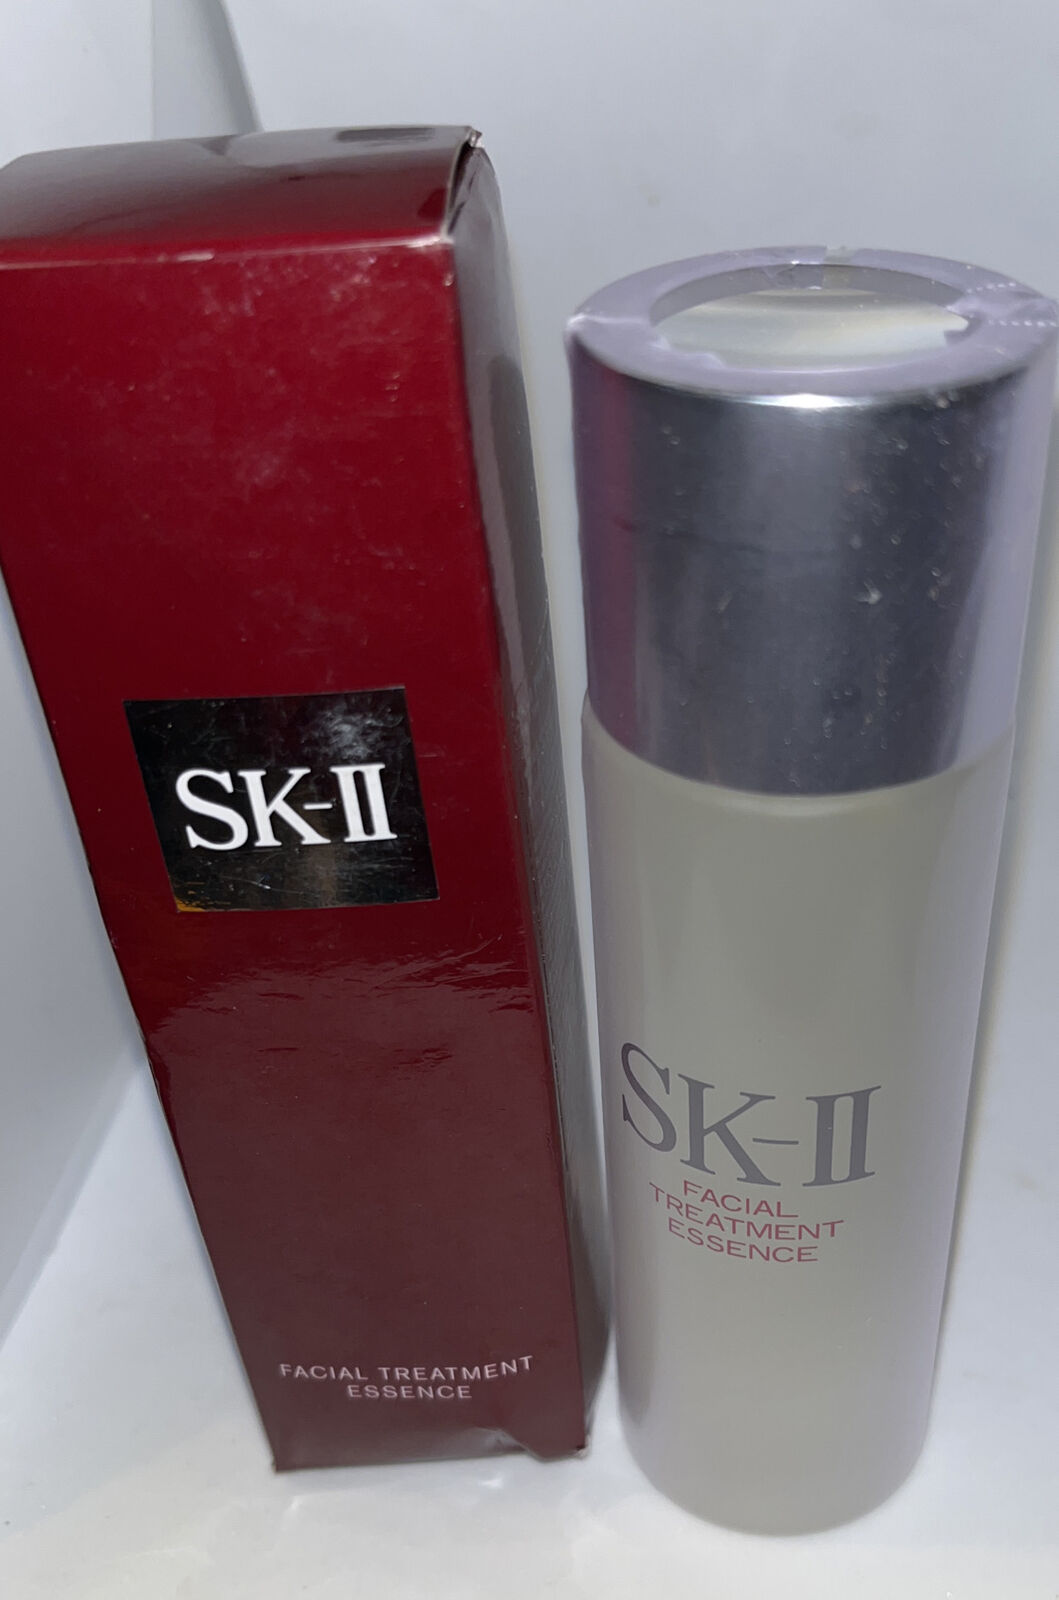 SK-II Facial Treatment Essence, 2.5 Oz NEW IN BOX.  SEALED